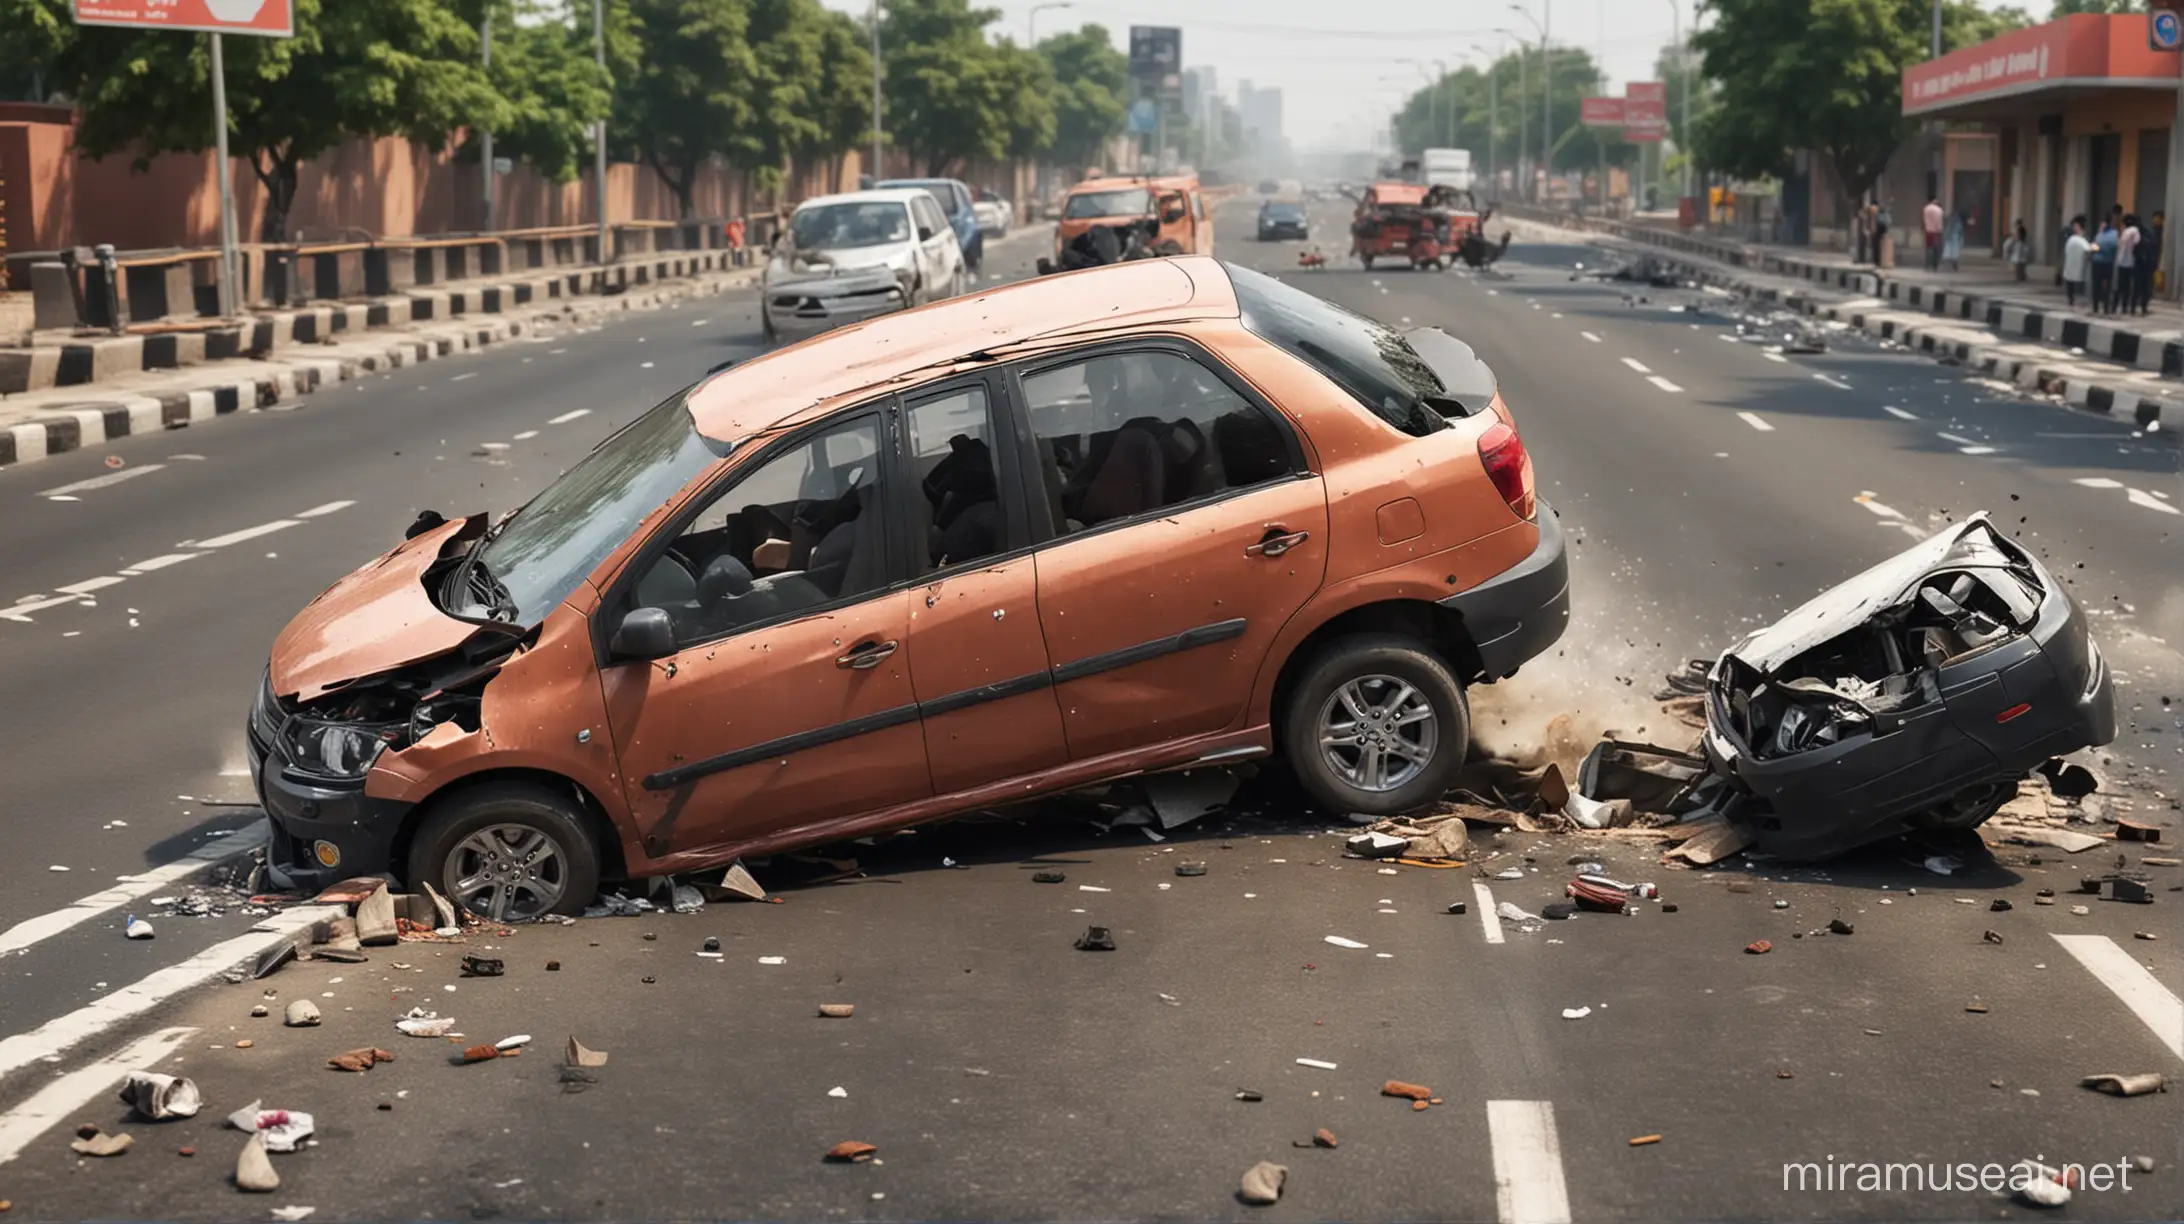 Create a realistic depiction of a car accident scene in India: A car has overturned after hitting a divider on a busy road. The scene should show the car's damaged exterior, Include surrounding elements like traffic, bystanders, and emergency services arriving at the scene.